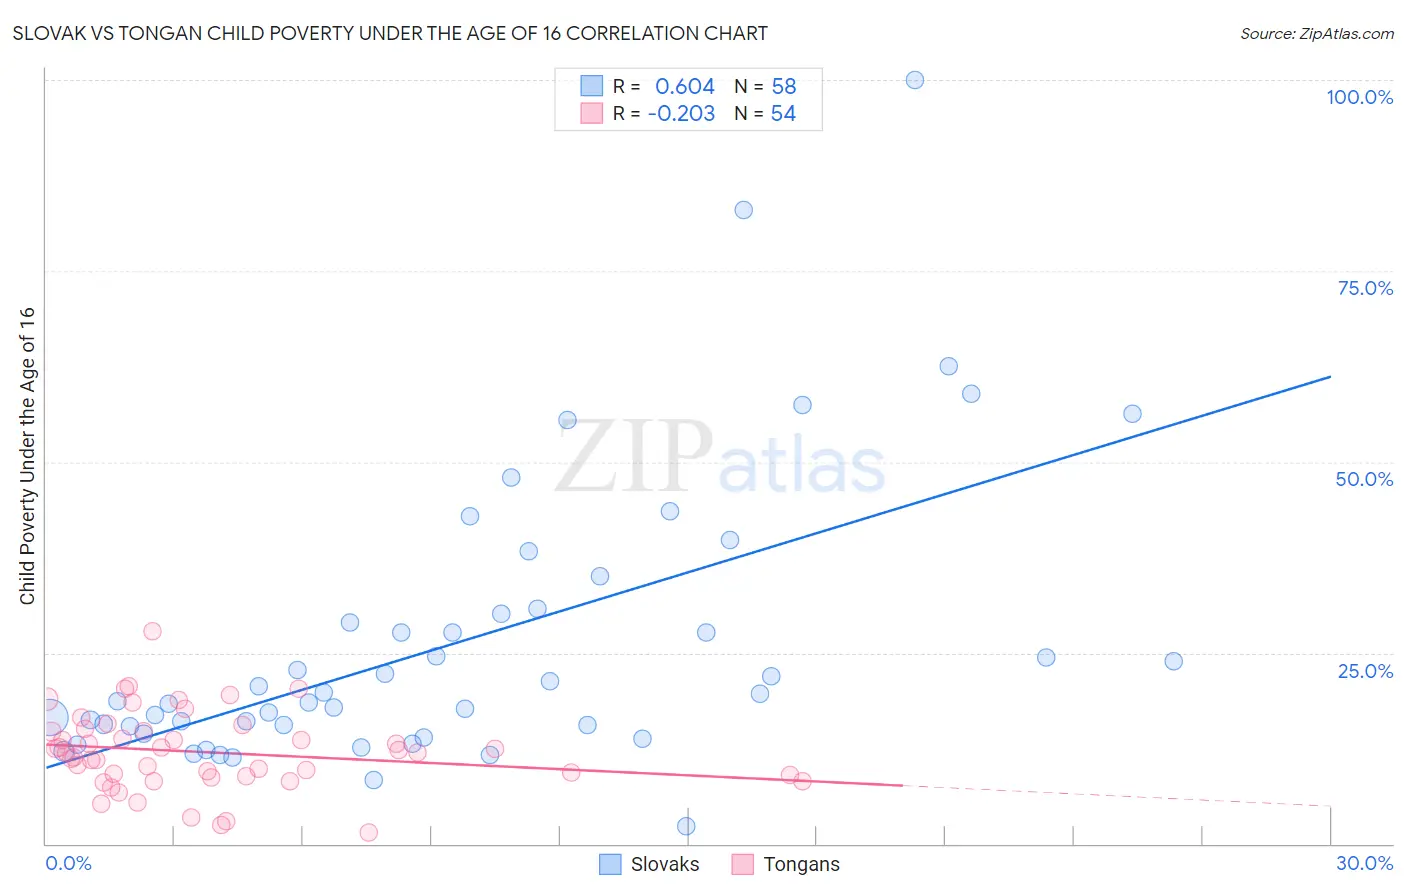 Slovak vs Tongan Child Poverty Under the Age of 16